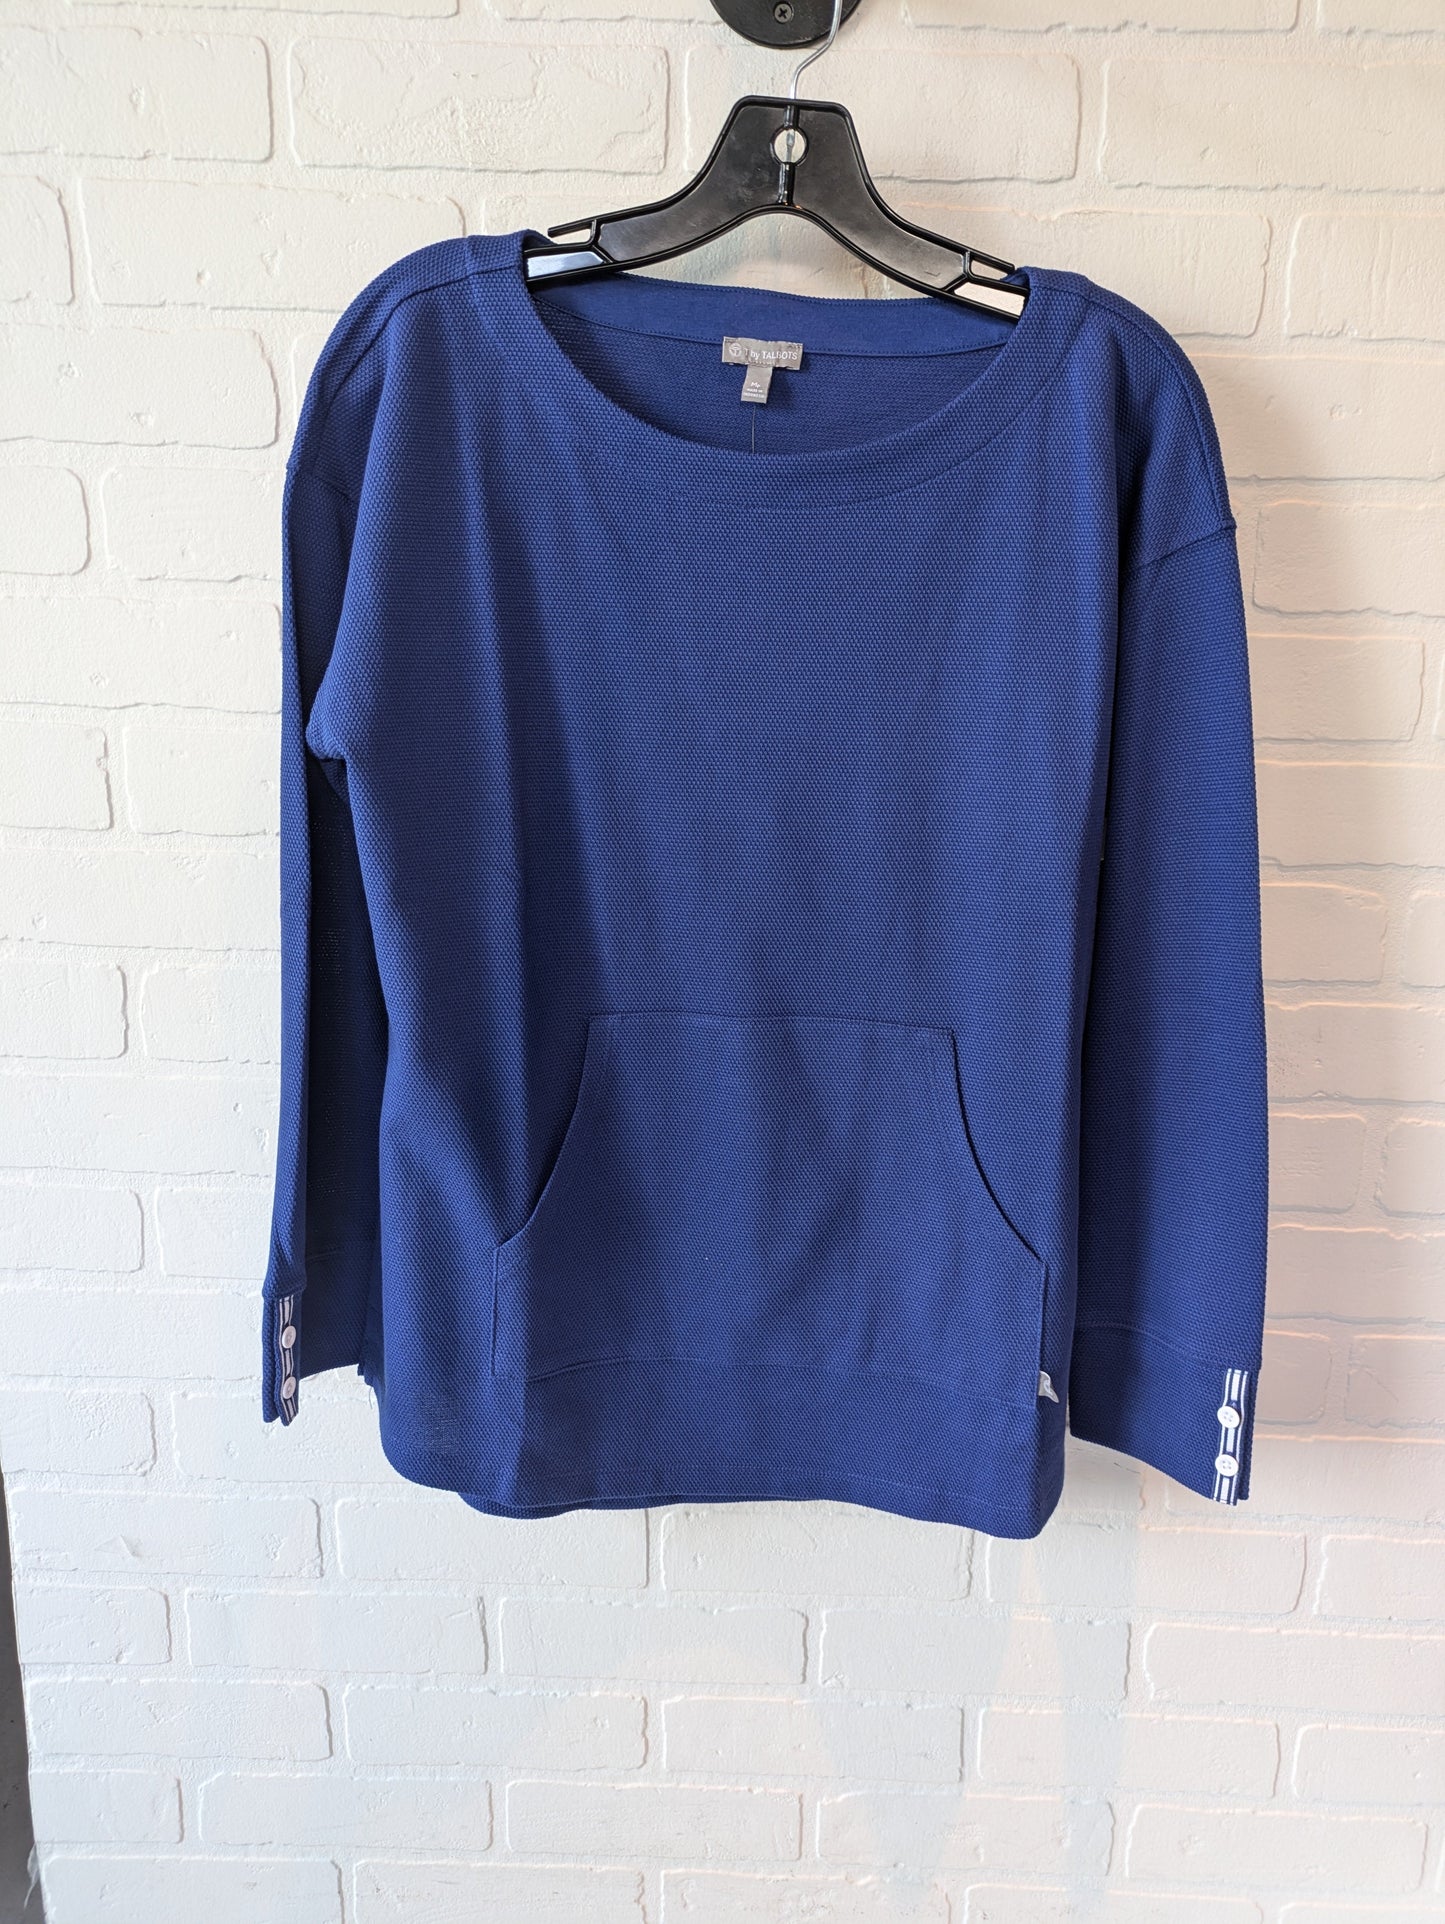 Blue & White Top Long Sleeve Talbots, Size M